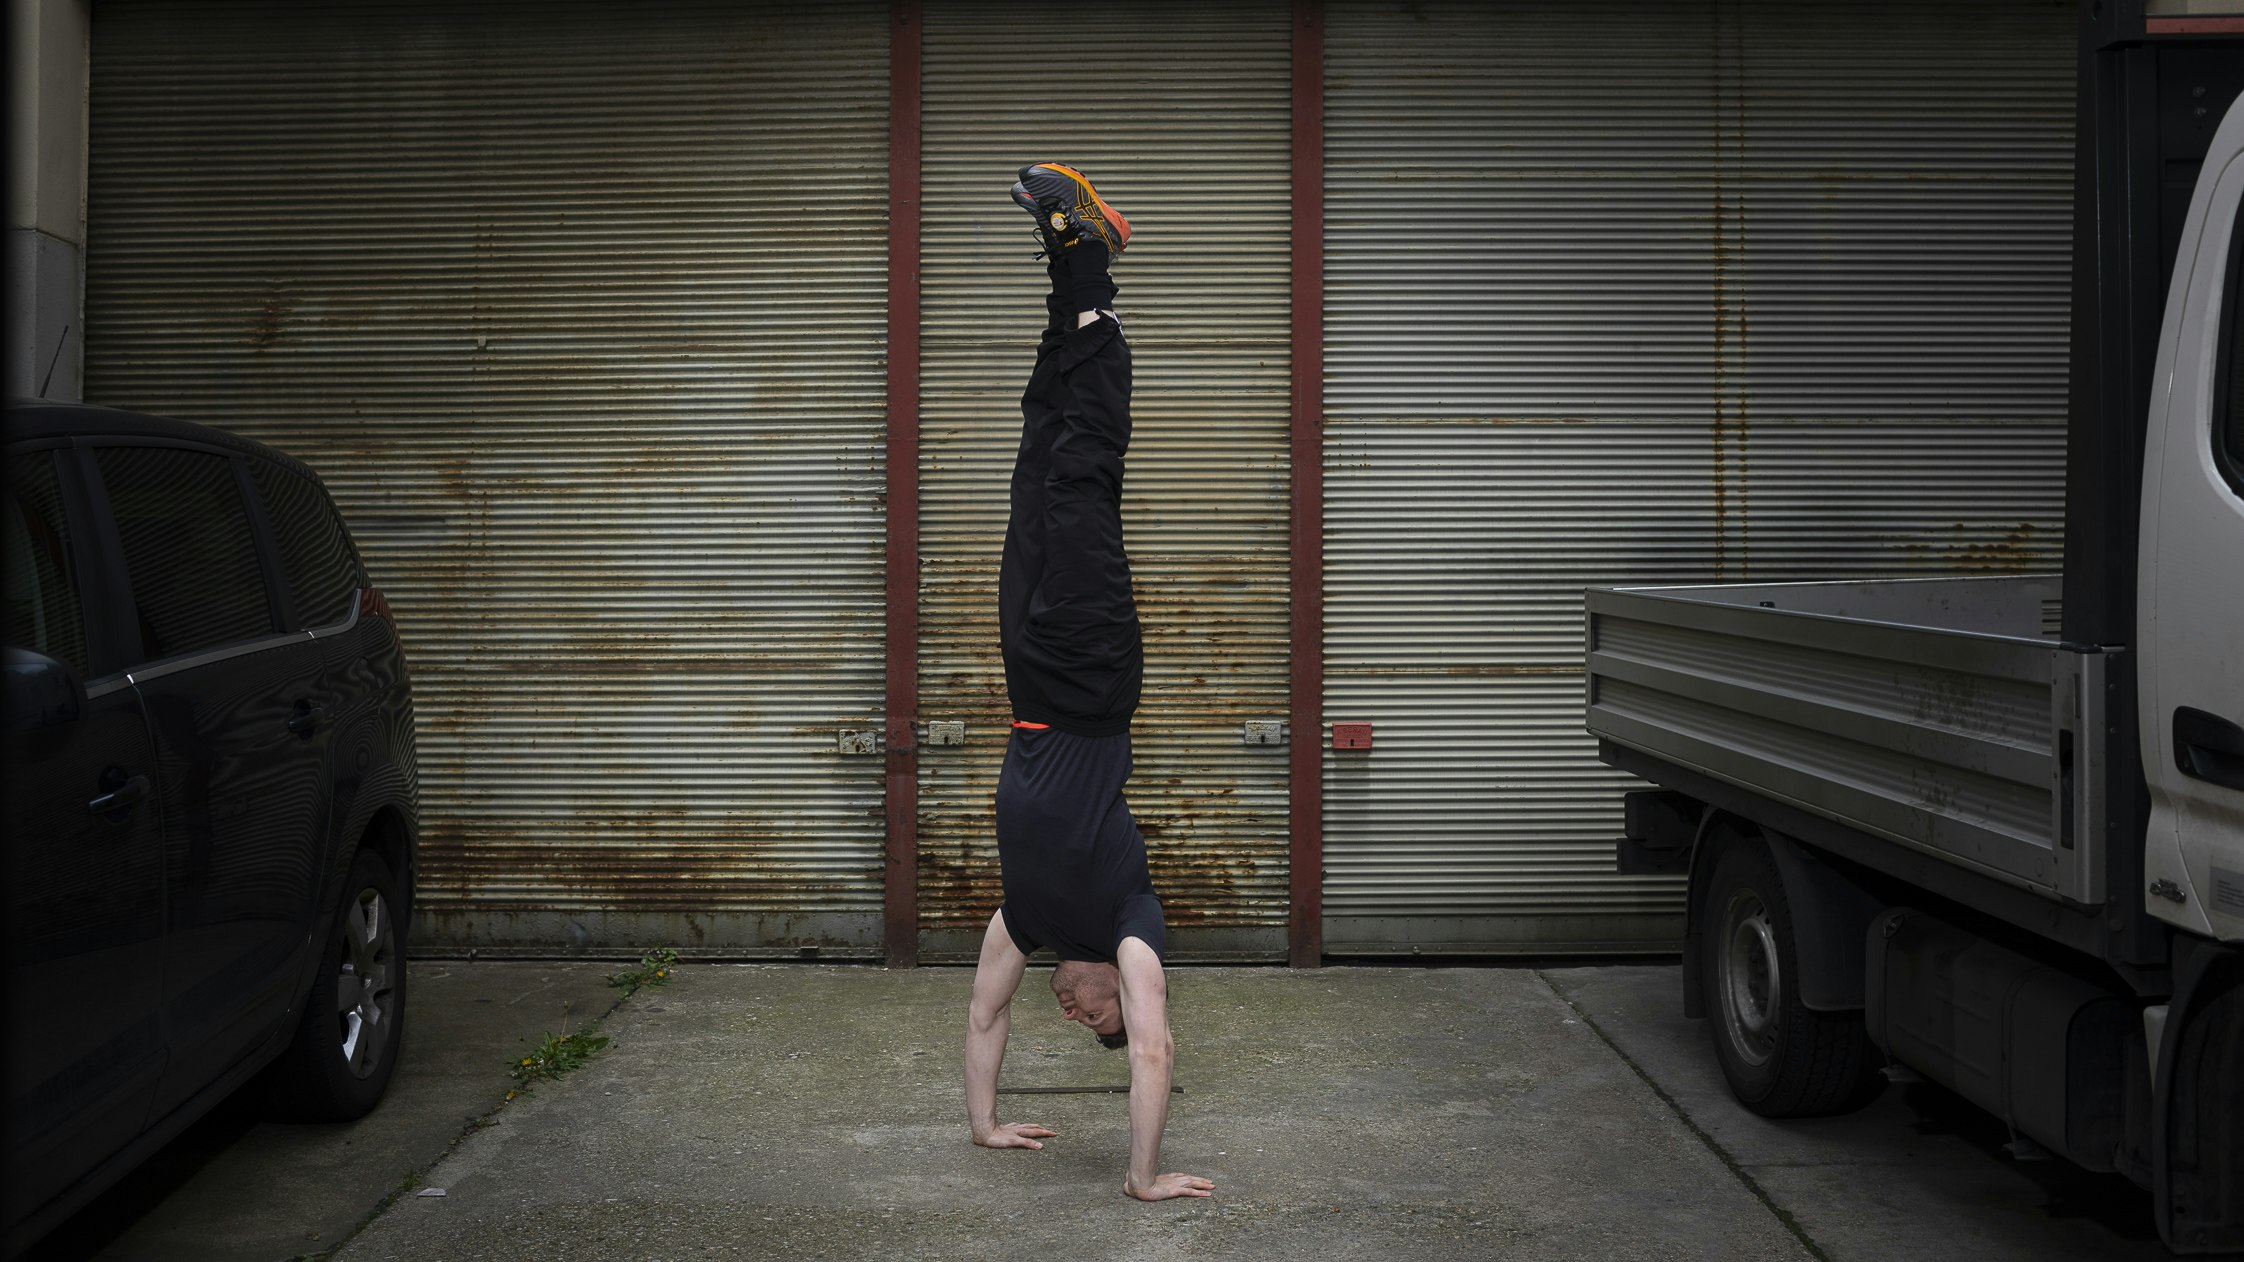 Manual Hanel doing a handstand among two cars in a garage.